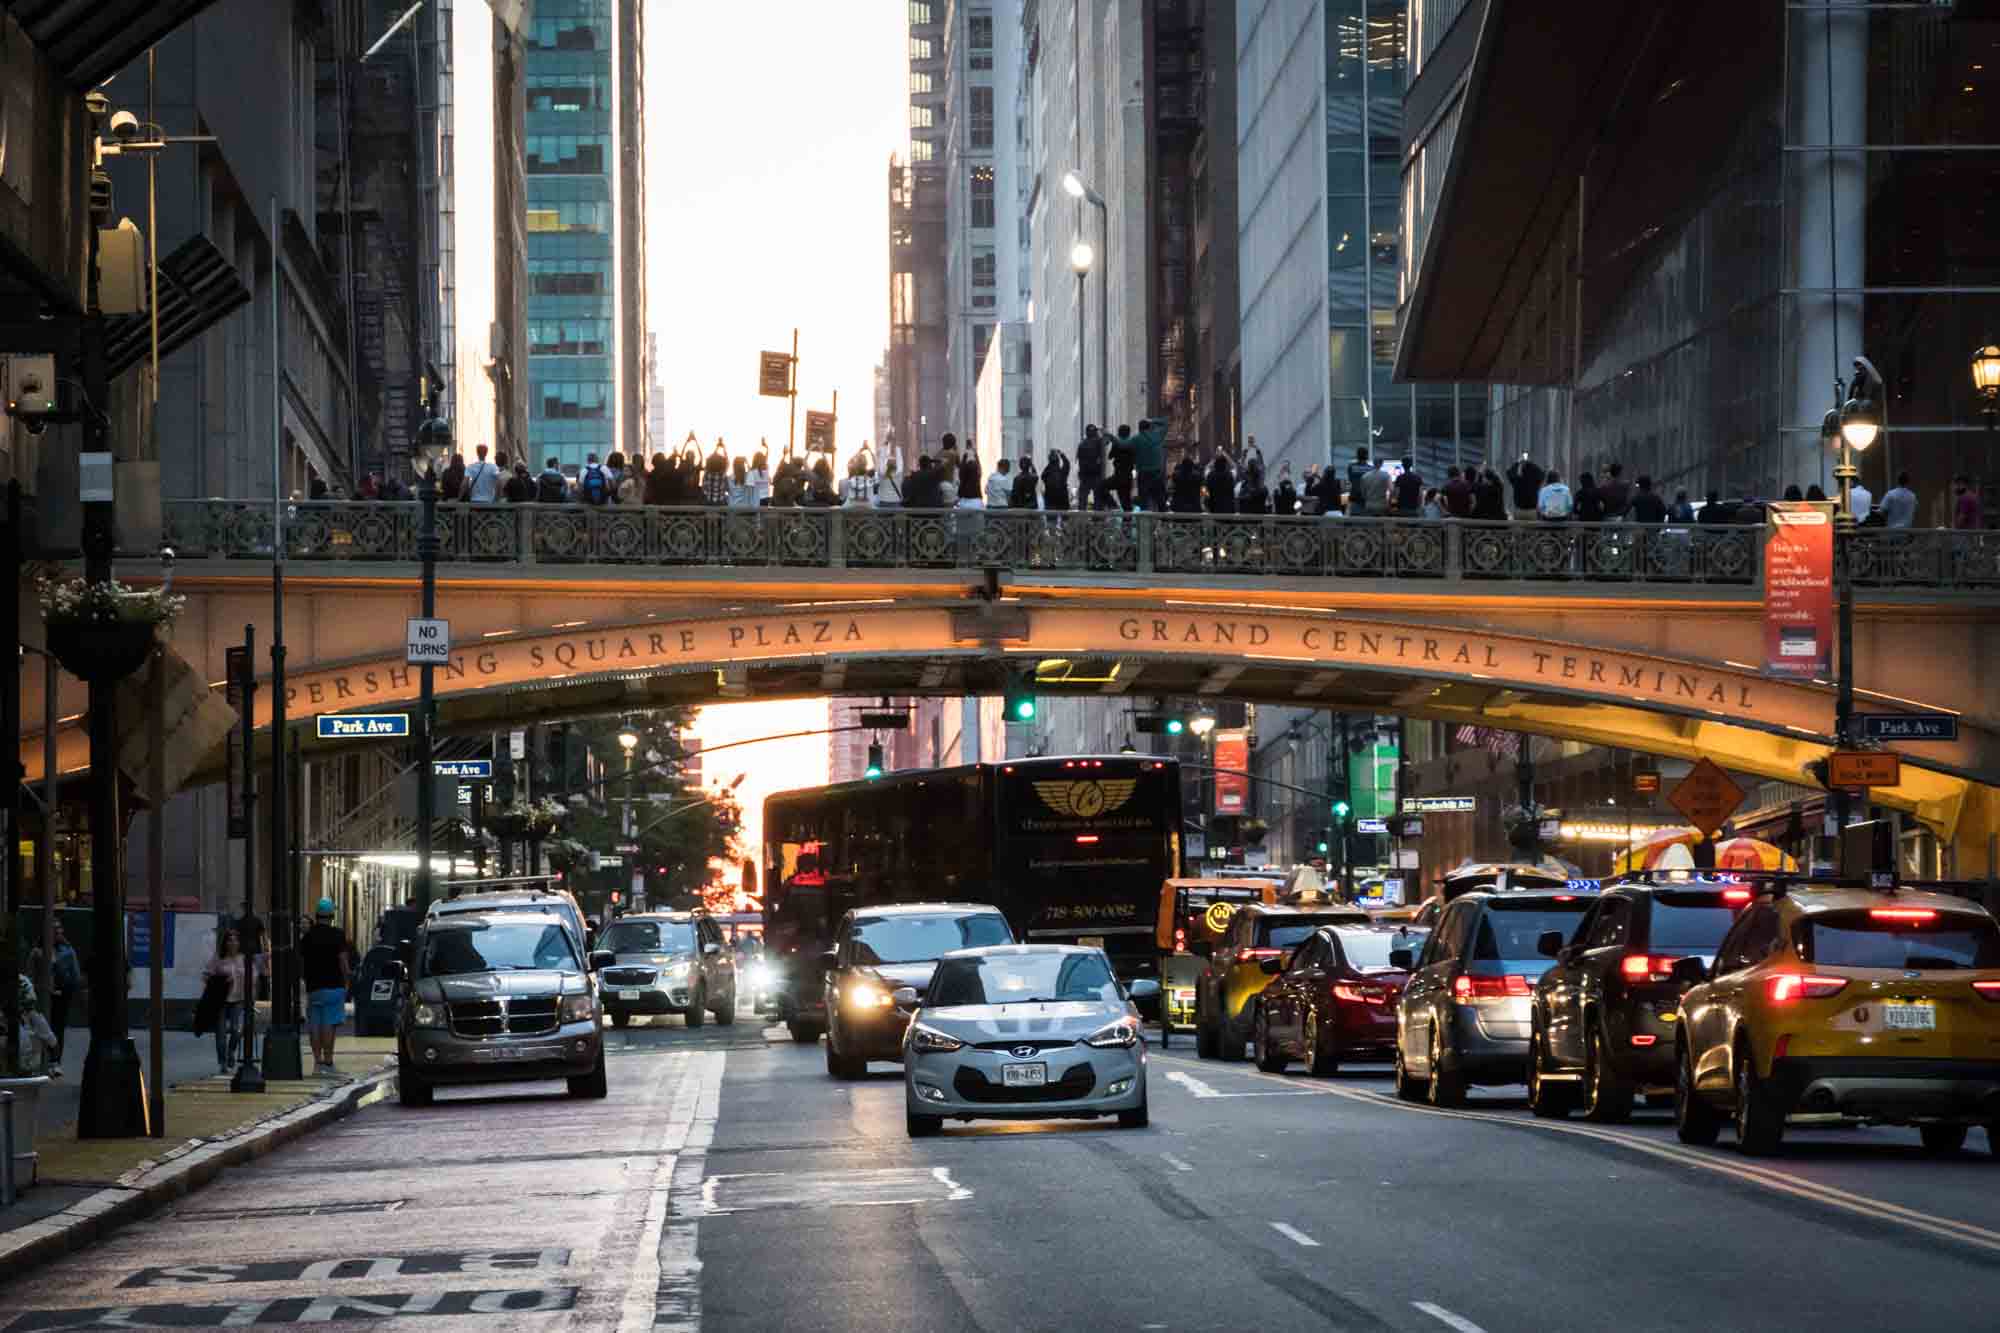 Tourists lined up on overpass watching Manhattanhenge with cars on street below